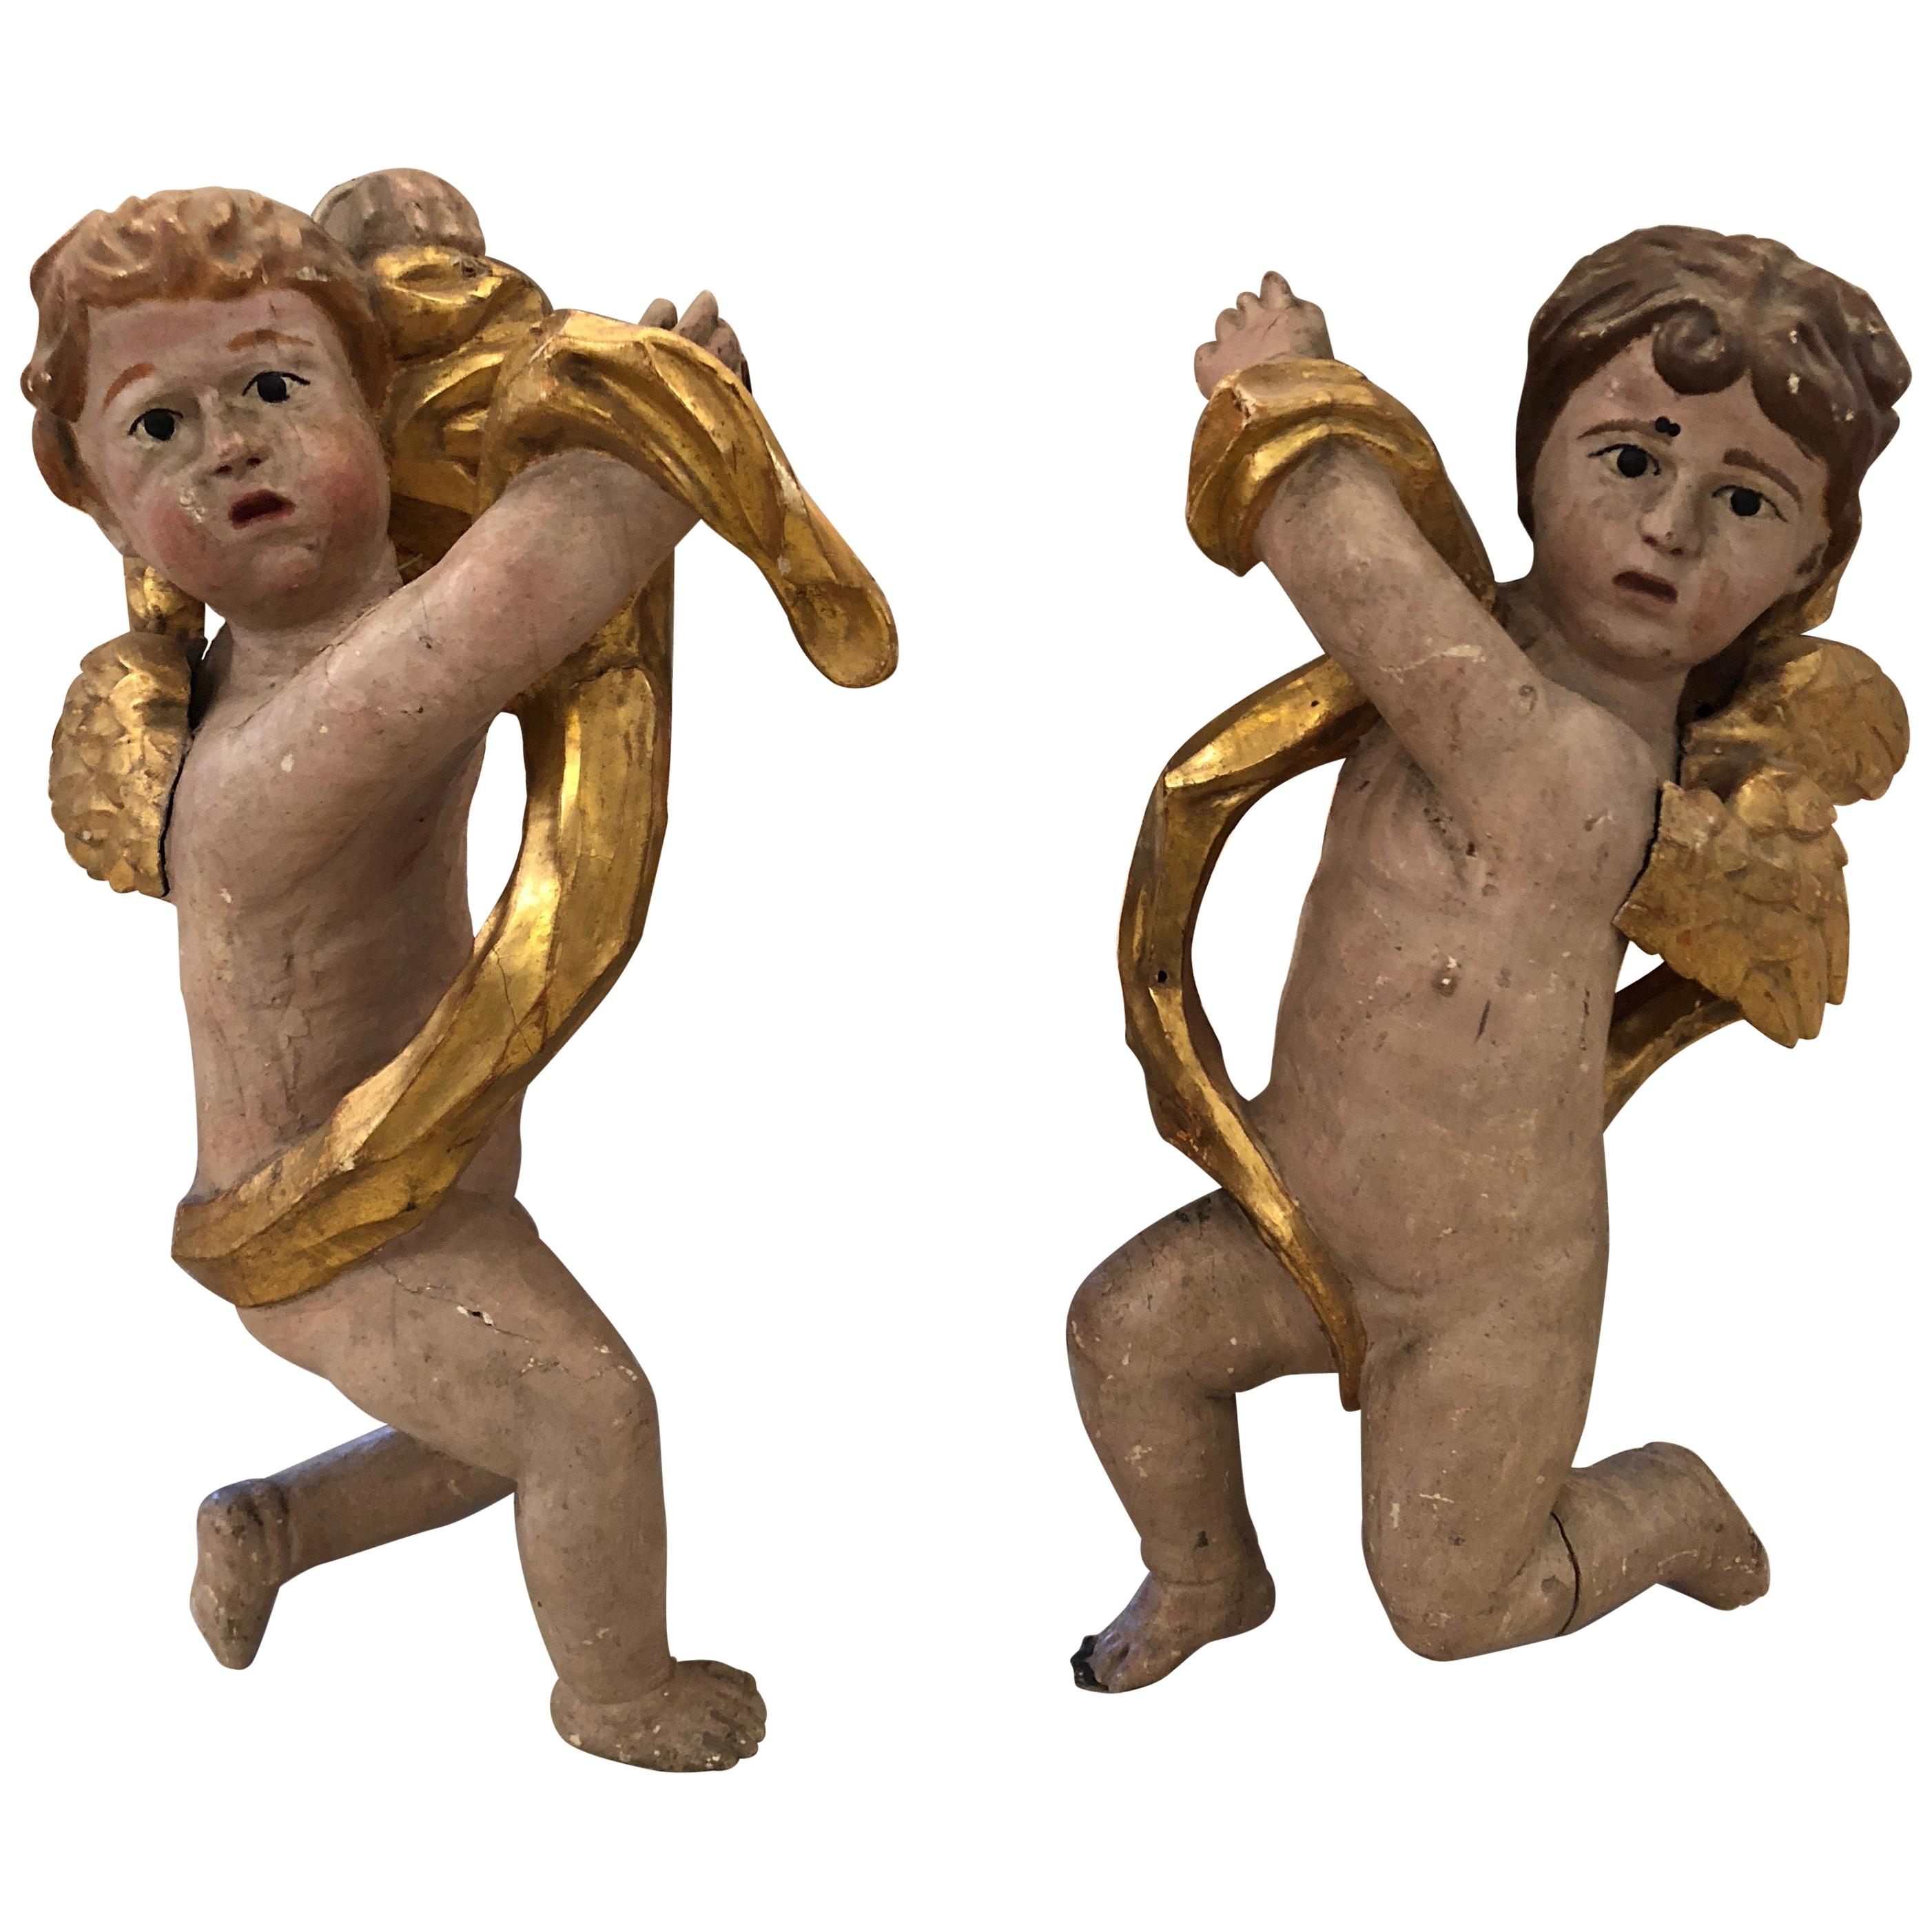 Pair of Antique Carved Wood and Gilded Cherub Sculptures